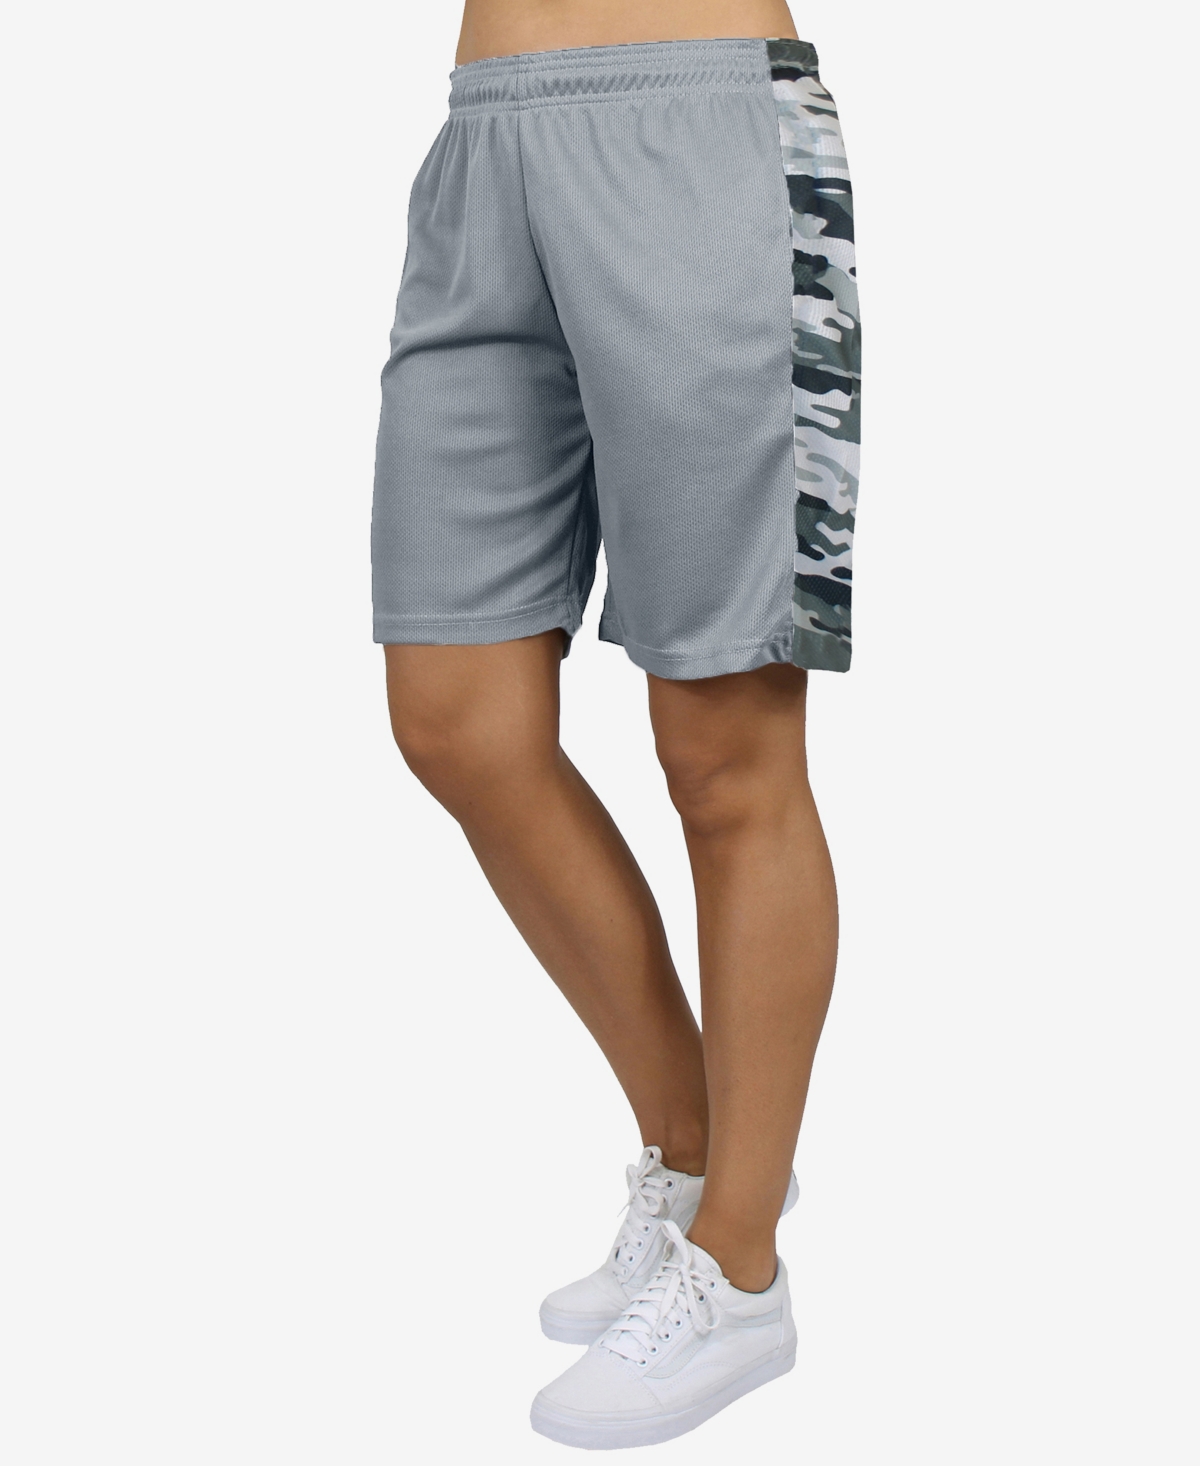 Women's Loose Fit Quick Dry Mesh Shorts - Silver